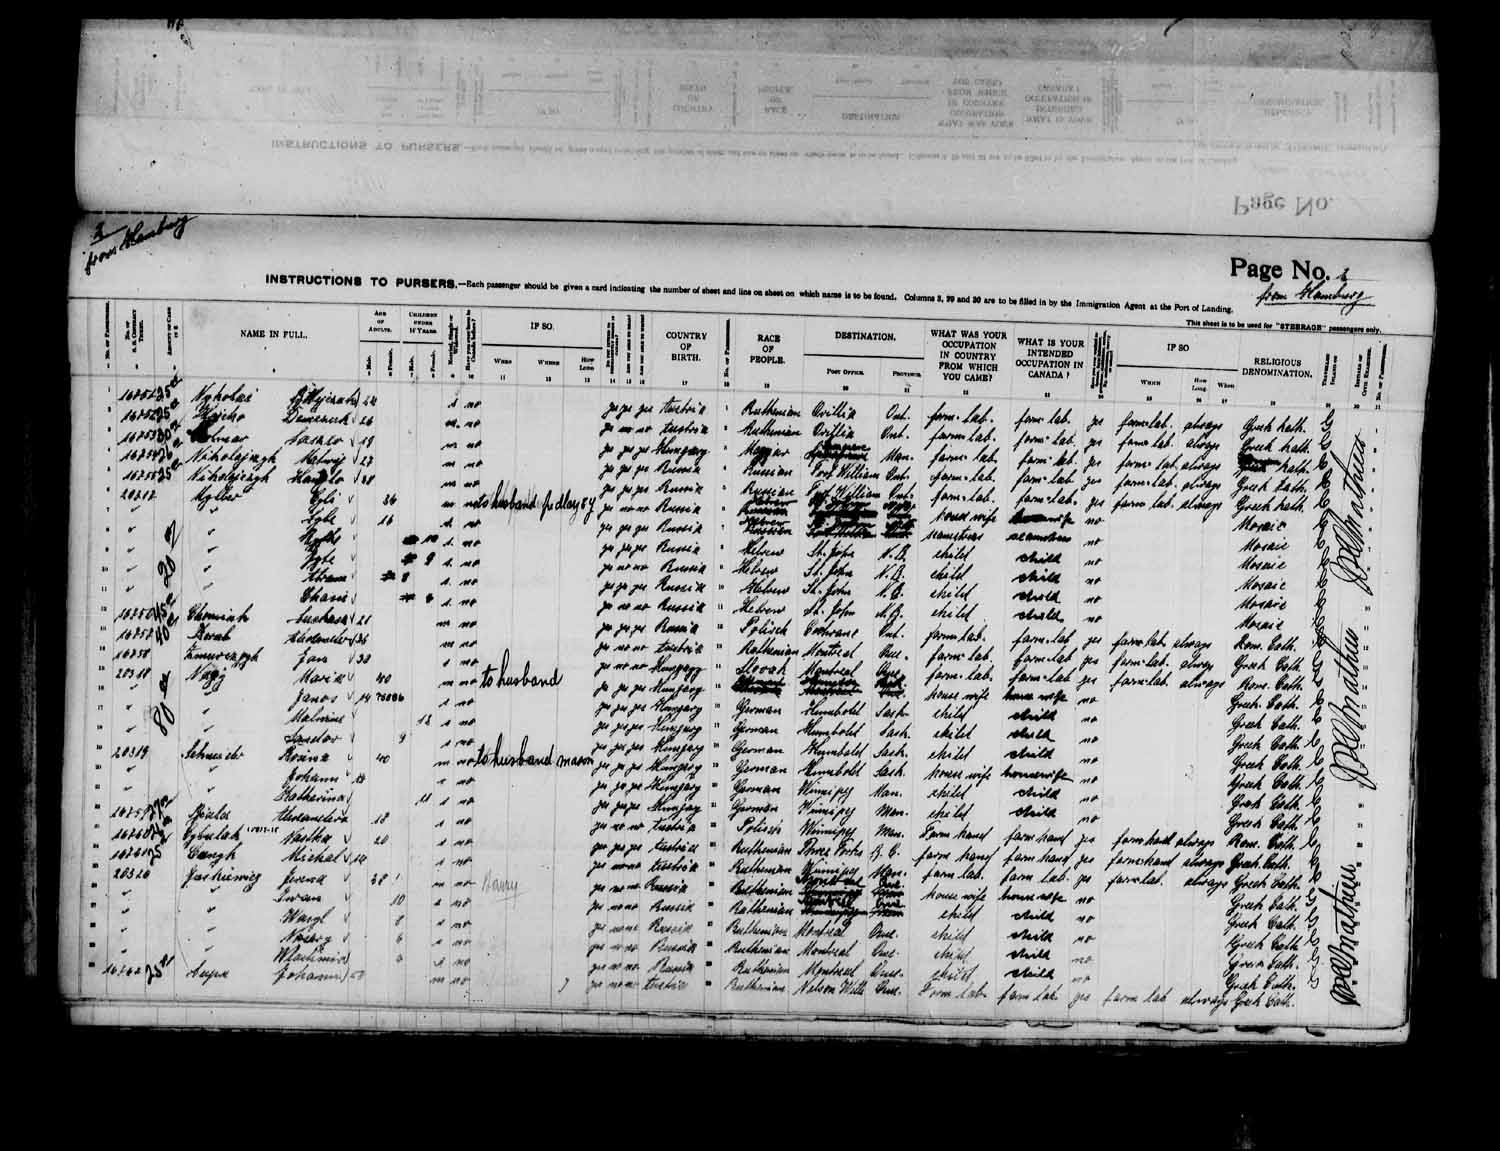 Digitized page of Passenger Lists for Image No.: e003575014